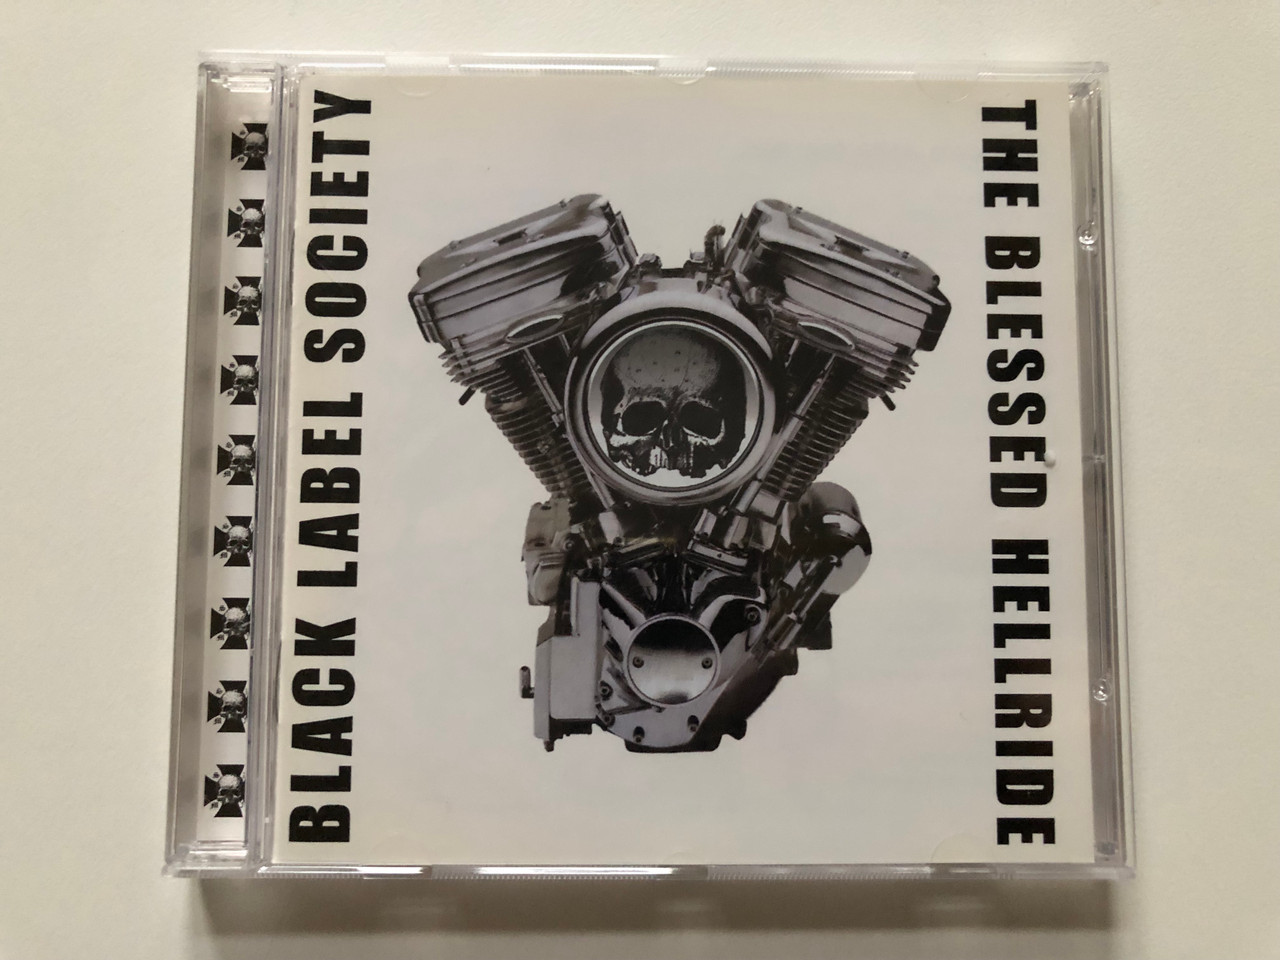 https://cdn10.bigcommerce.com/s-62bdpkt7pb/products/0/images/312874/Black_Label_Society_The_Blessed_Hellride_Spitfire_Records_Audio_CD_2003_SPITCD091_1__41319.1700206884.1280.1280.JPG?c=2